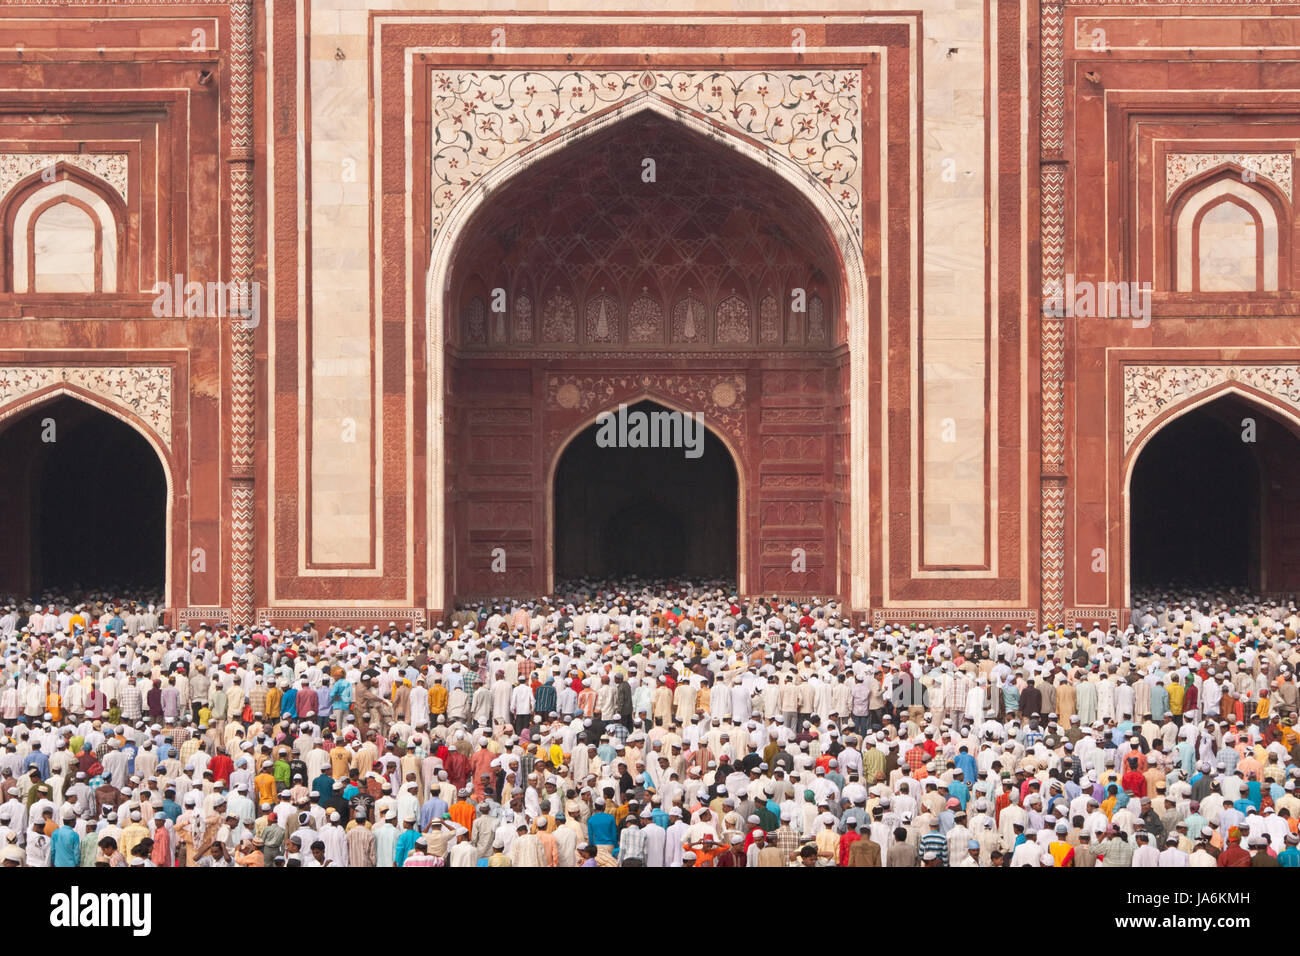 Thousands of gather in front of the mosque at the Taj Mahal to celebrate the Muslim festival of Eid ul-Fitr in Agra, Uttar Pradesh, India. Stock Photo